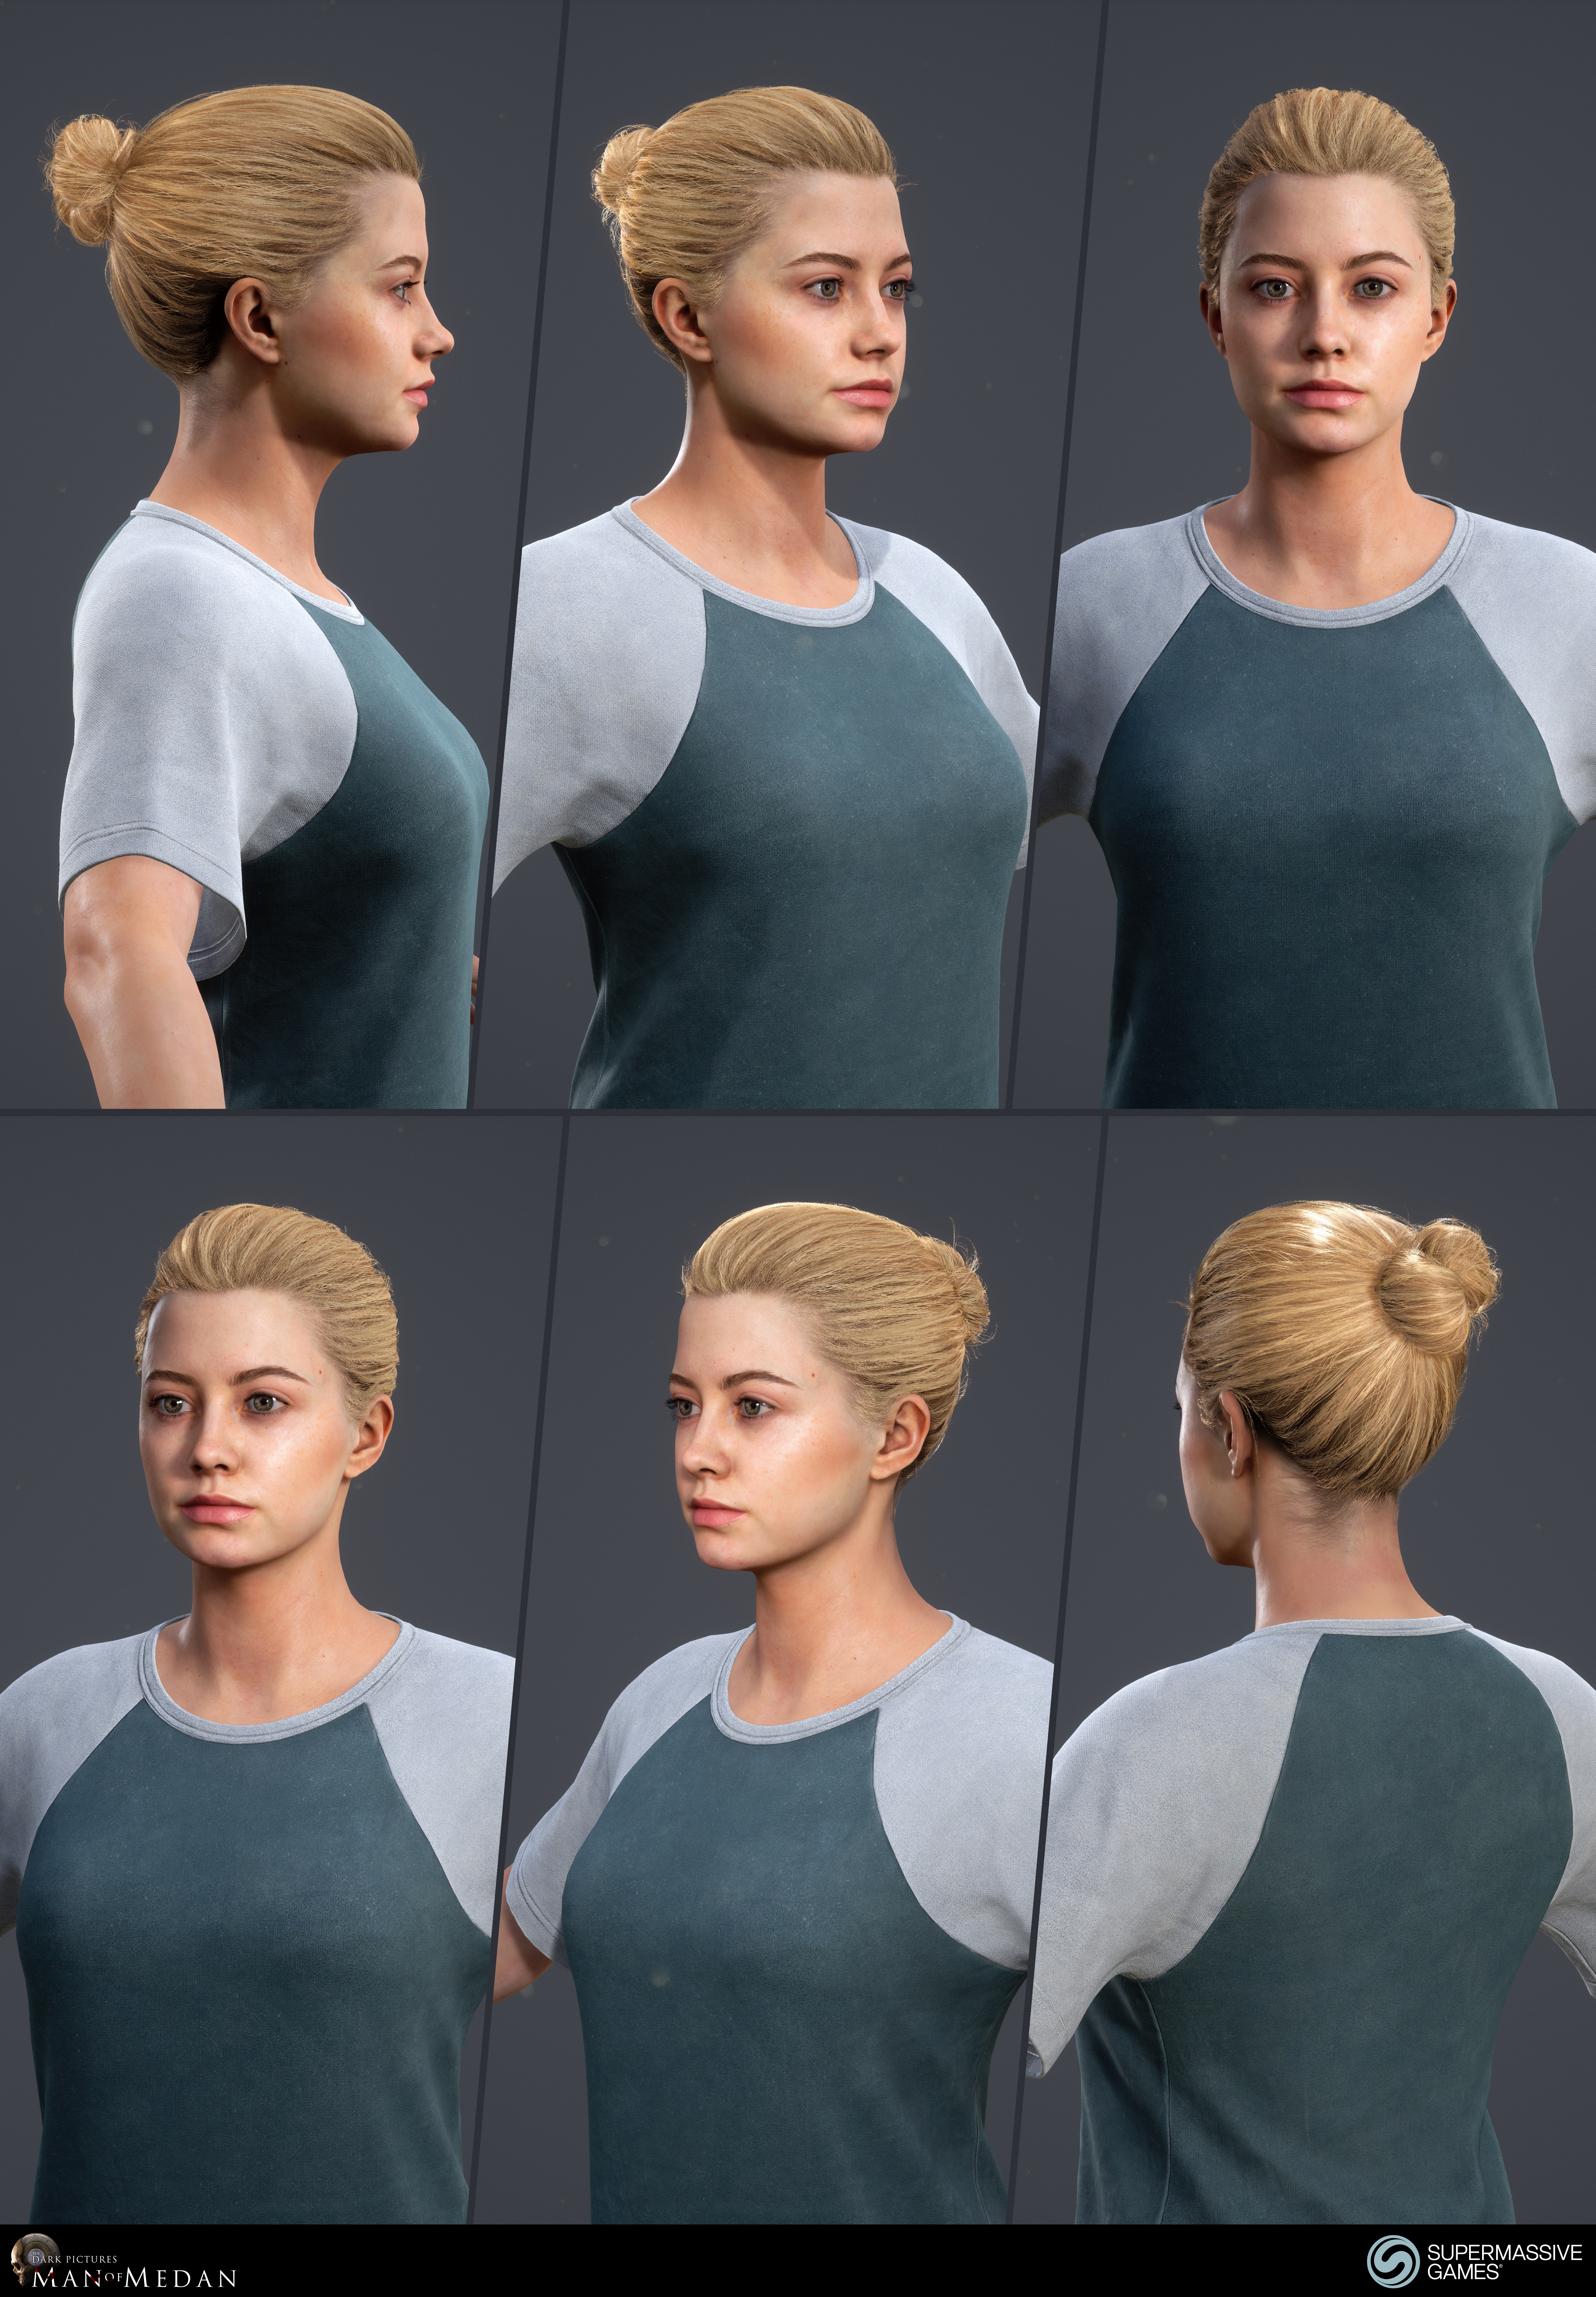 Julia is character in The Dark Pictures - Man of Medan game in Unreal Engine. She is a beautiful girl with blonde bun hair.